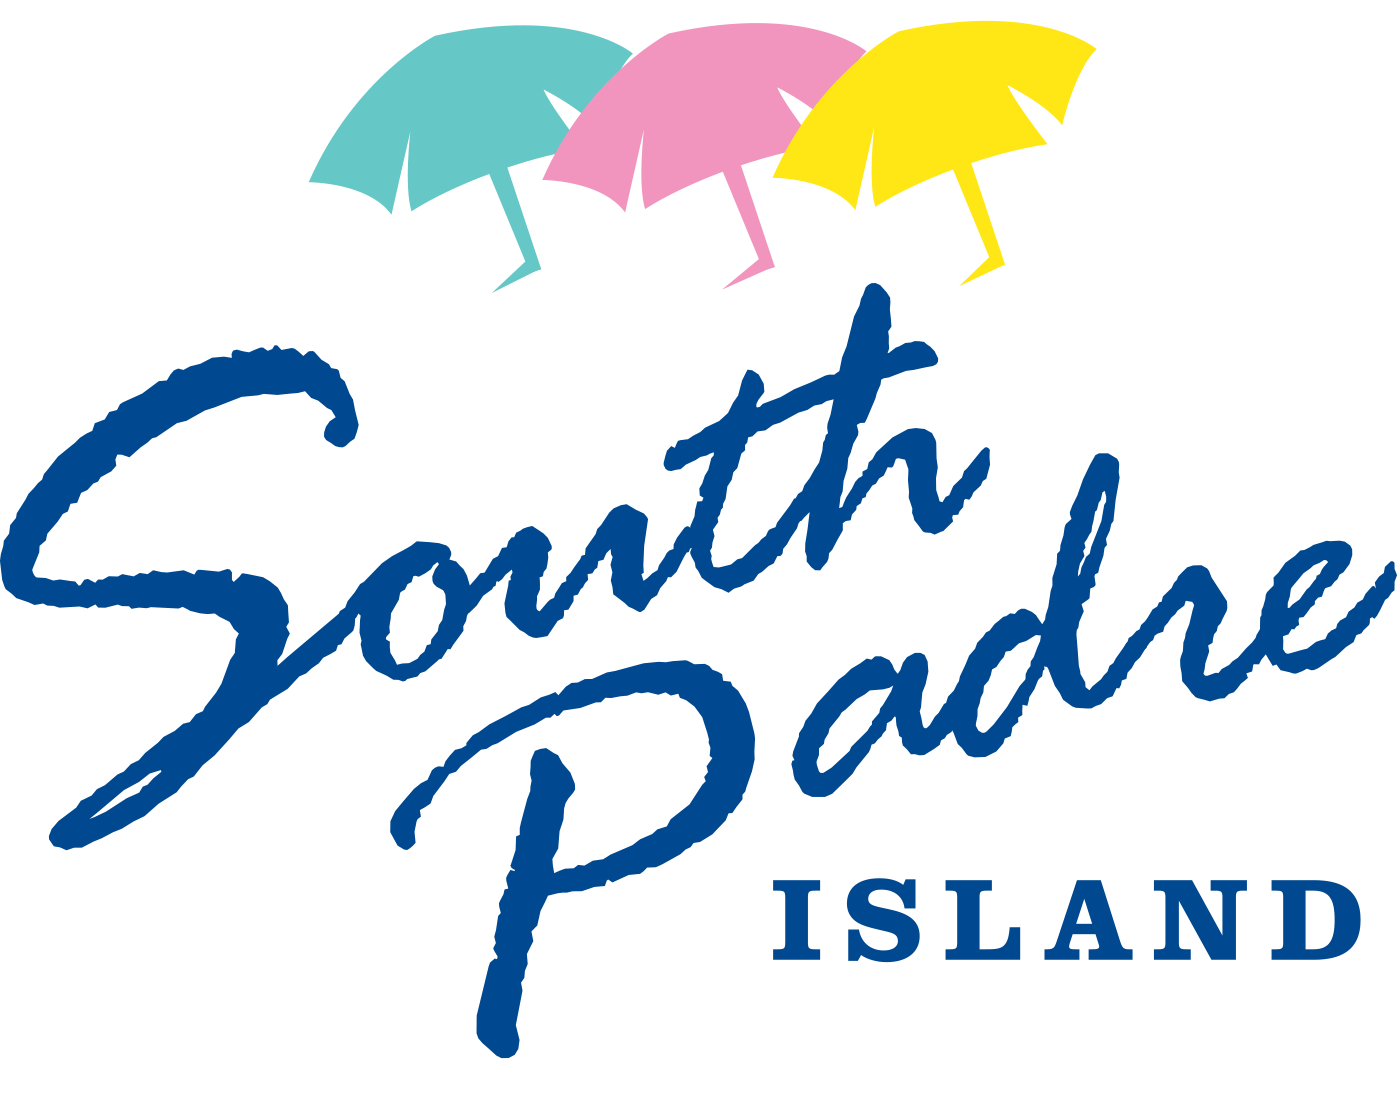 City of South Padre Island, Texas